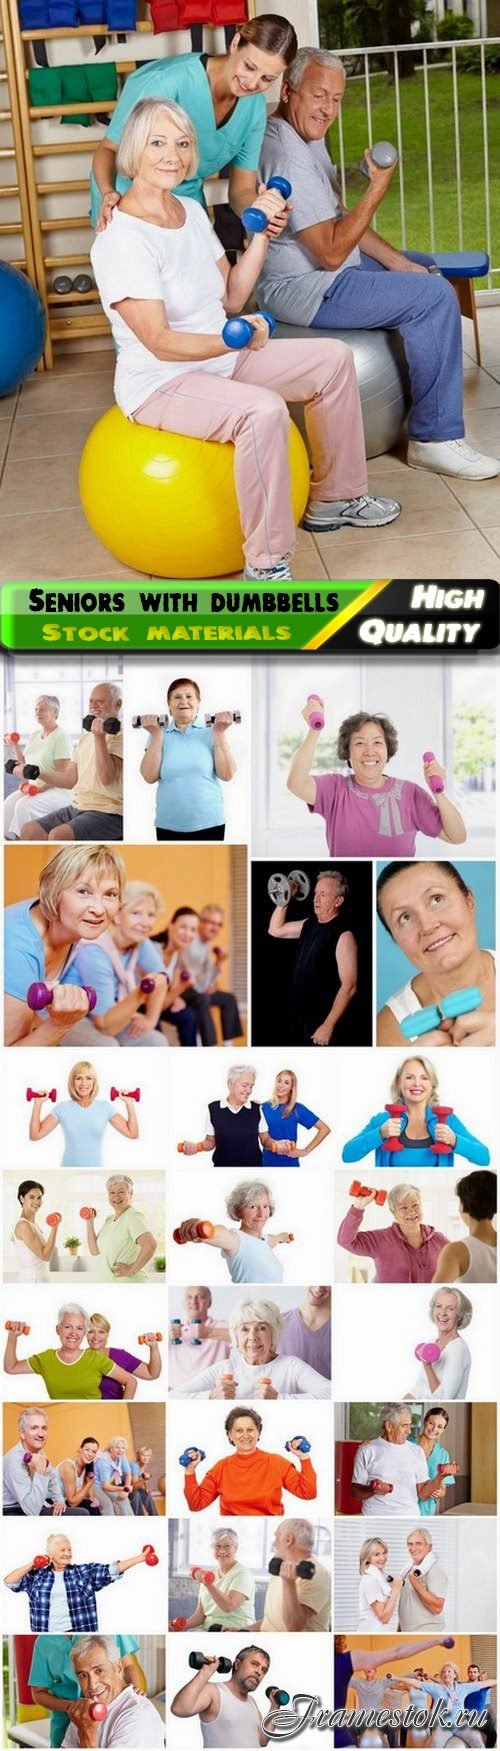 Old people and seniors in gum with dumbbells - 25 HQ Jpg